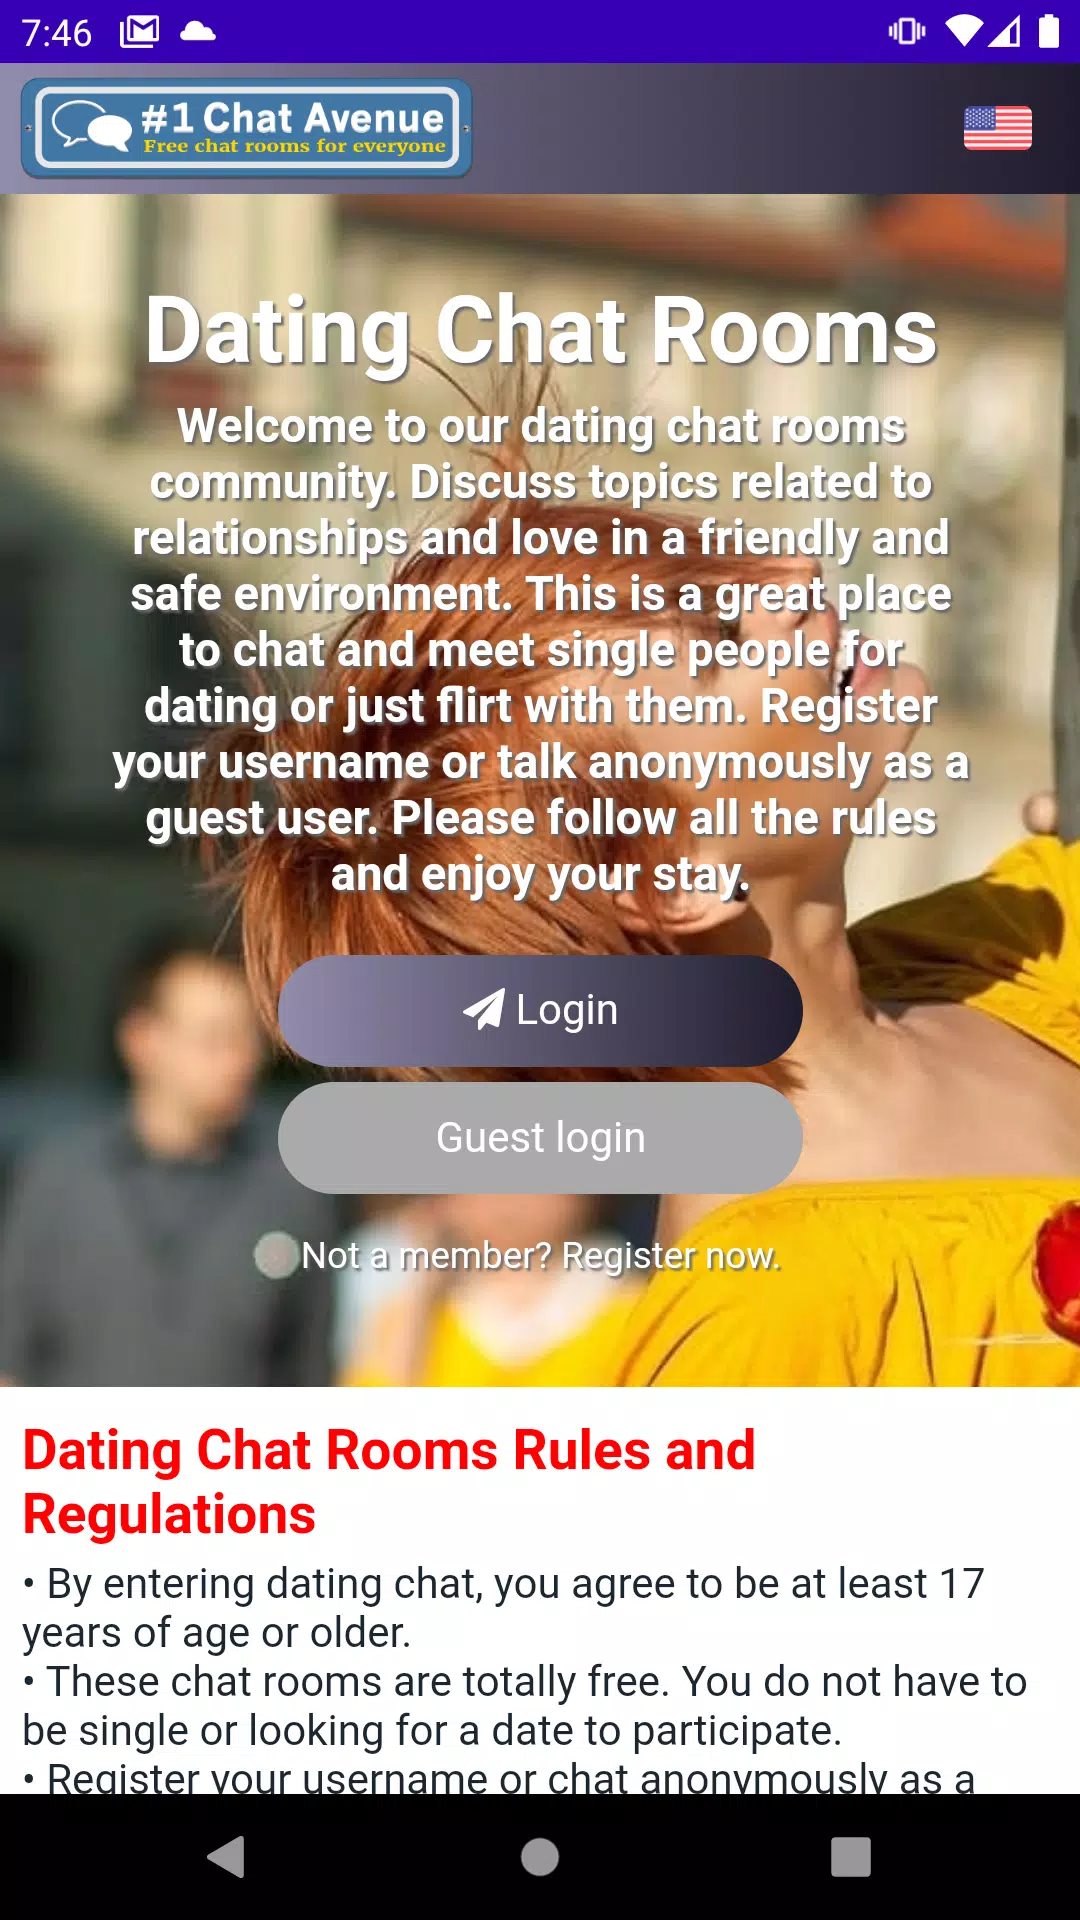 Rooms date chat and Free Chat